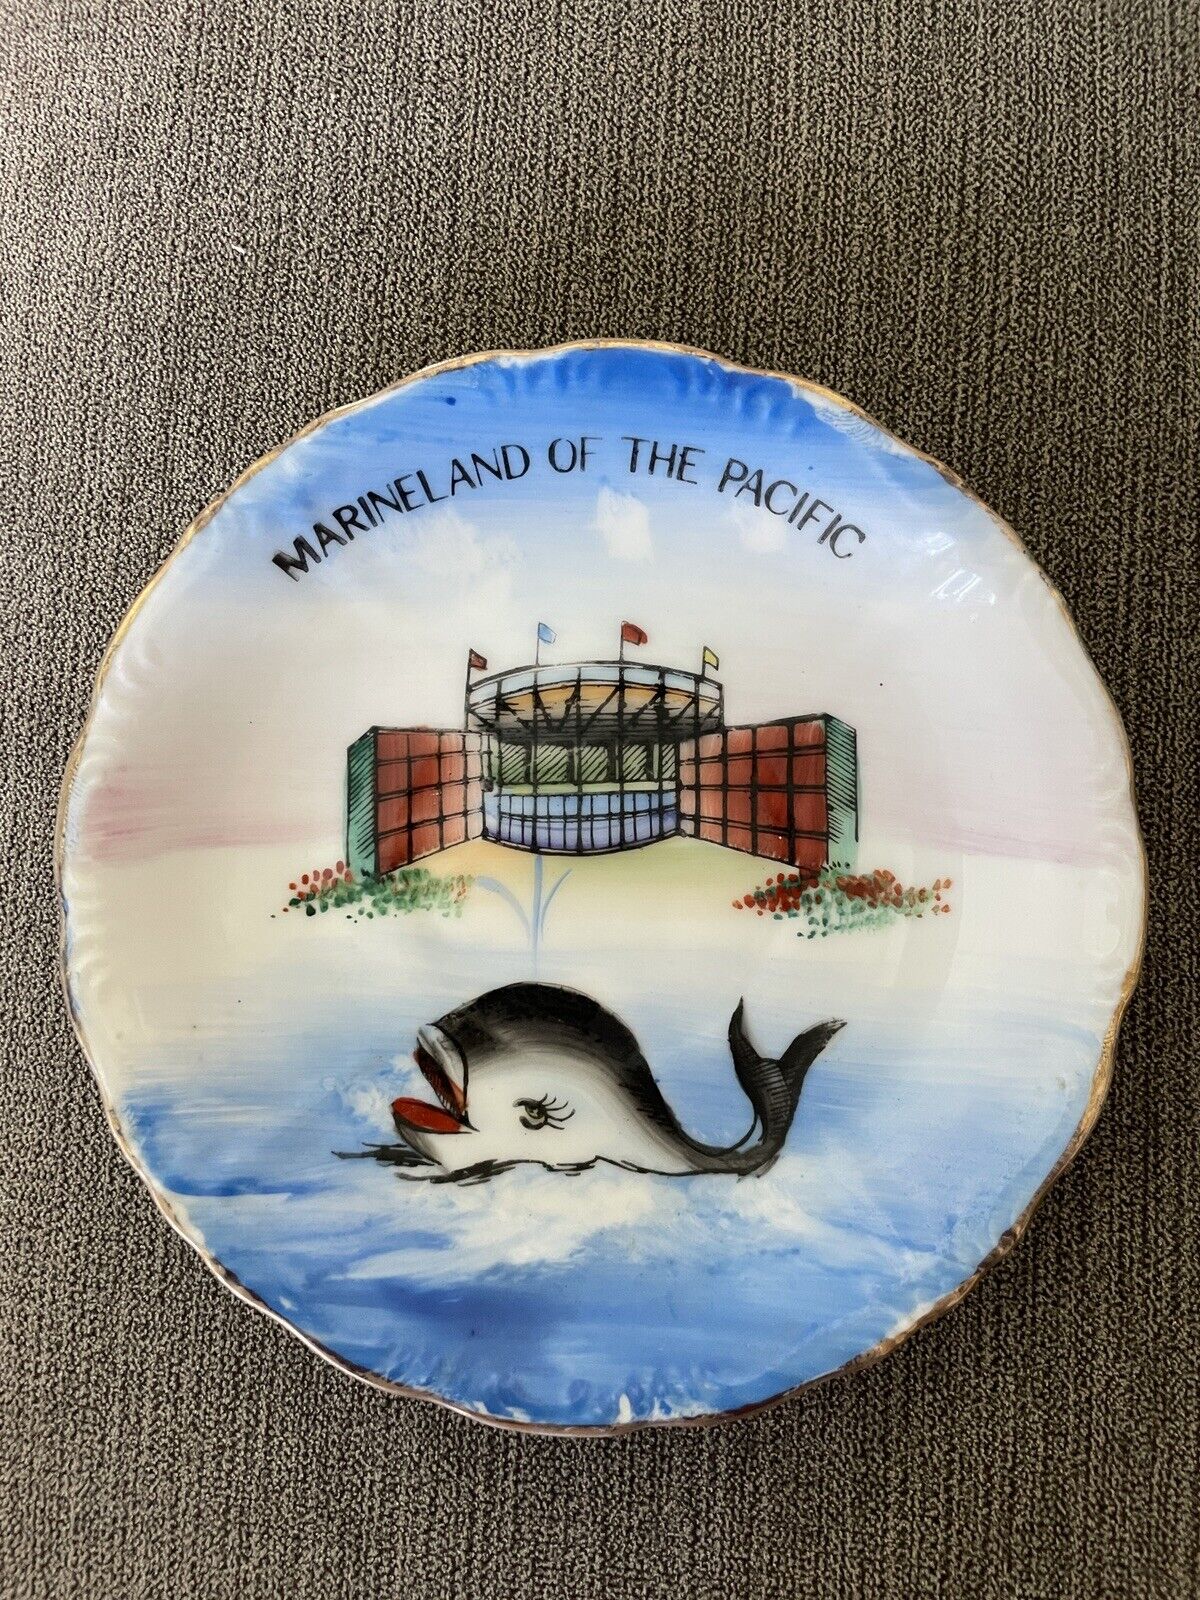 Vintage Marineland of the Pacific Souvenir Plate 5 3/4 inches